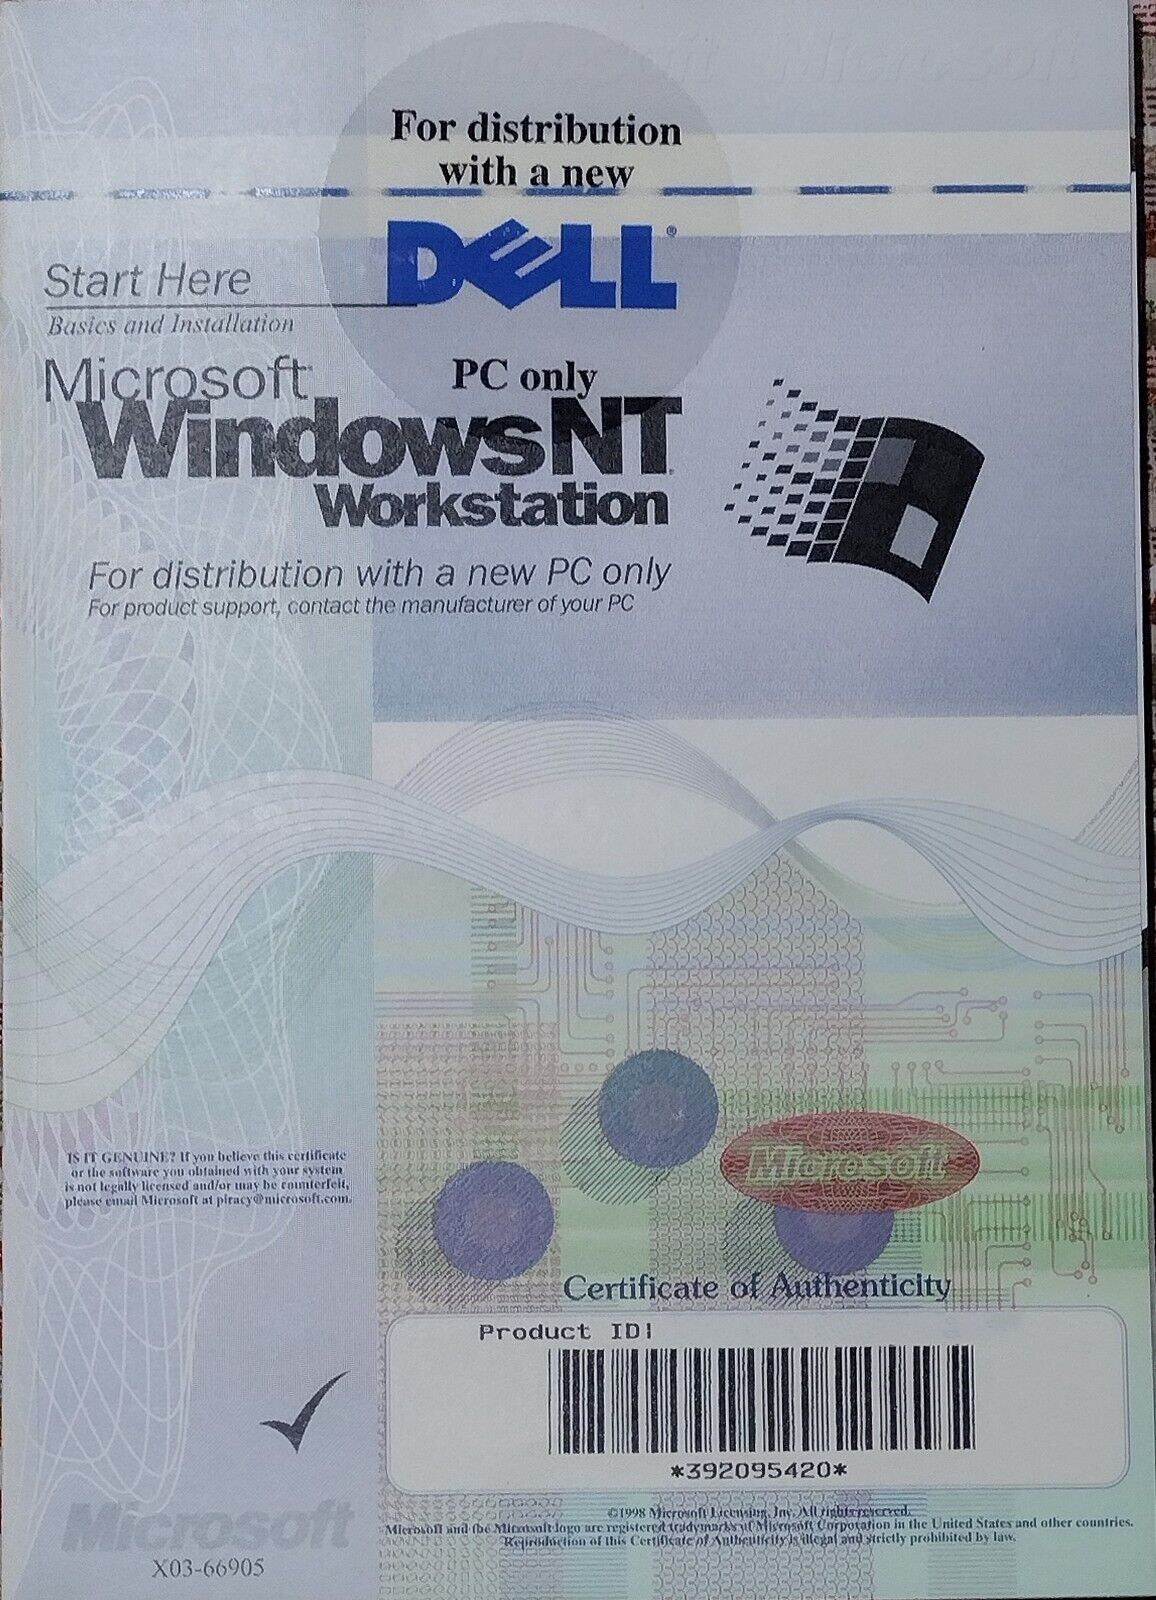 Microsoft Windows NT 4.0 Workstation with boot disks 